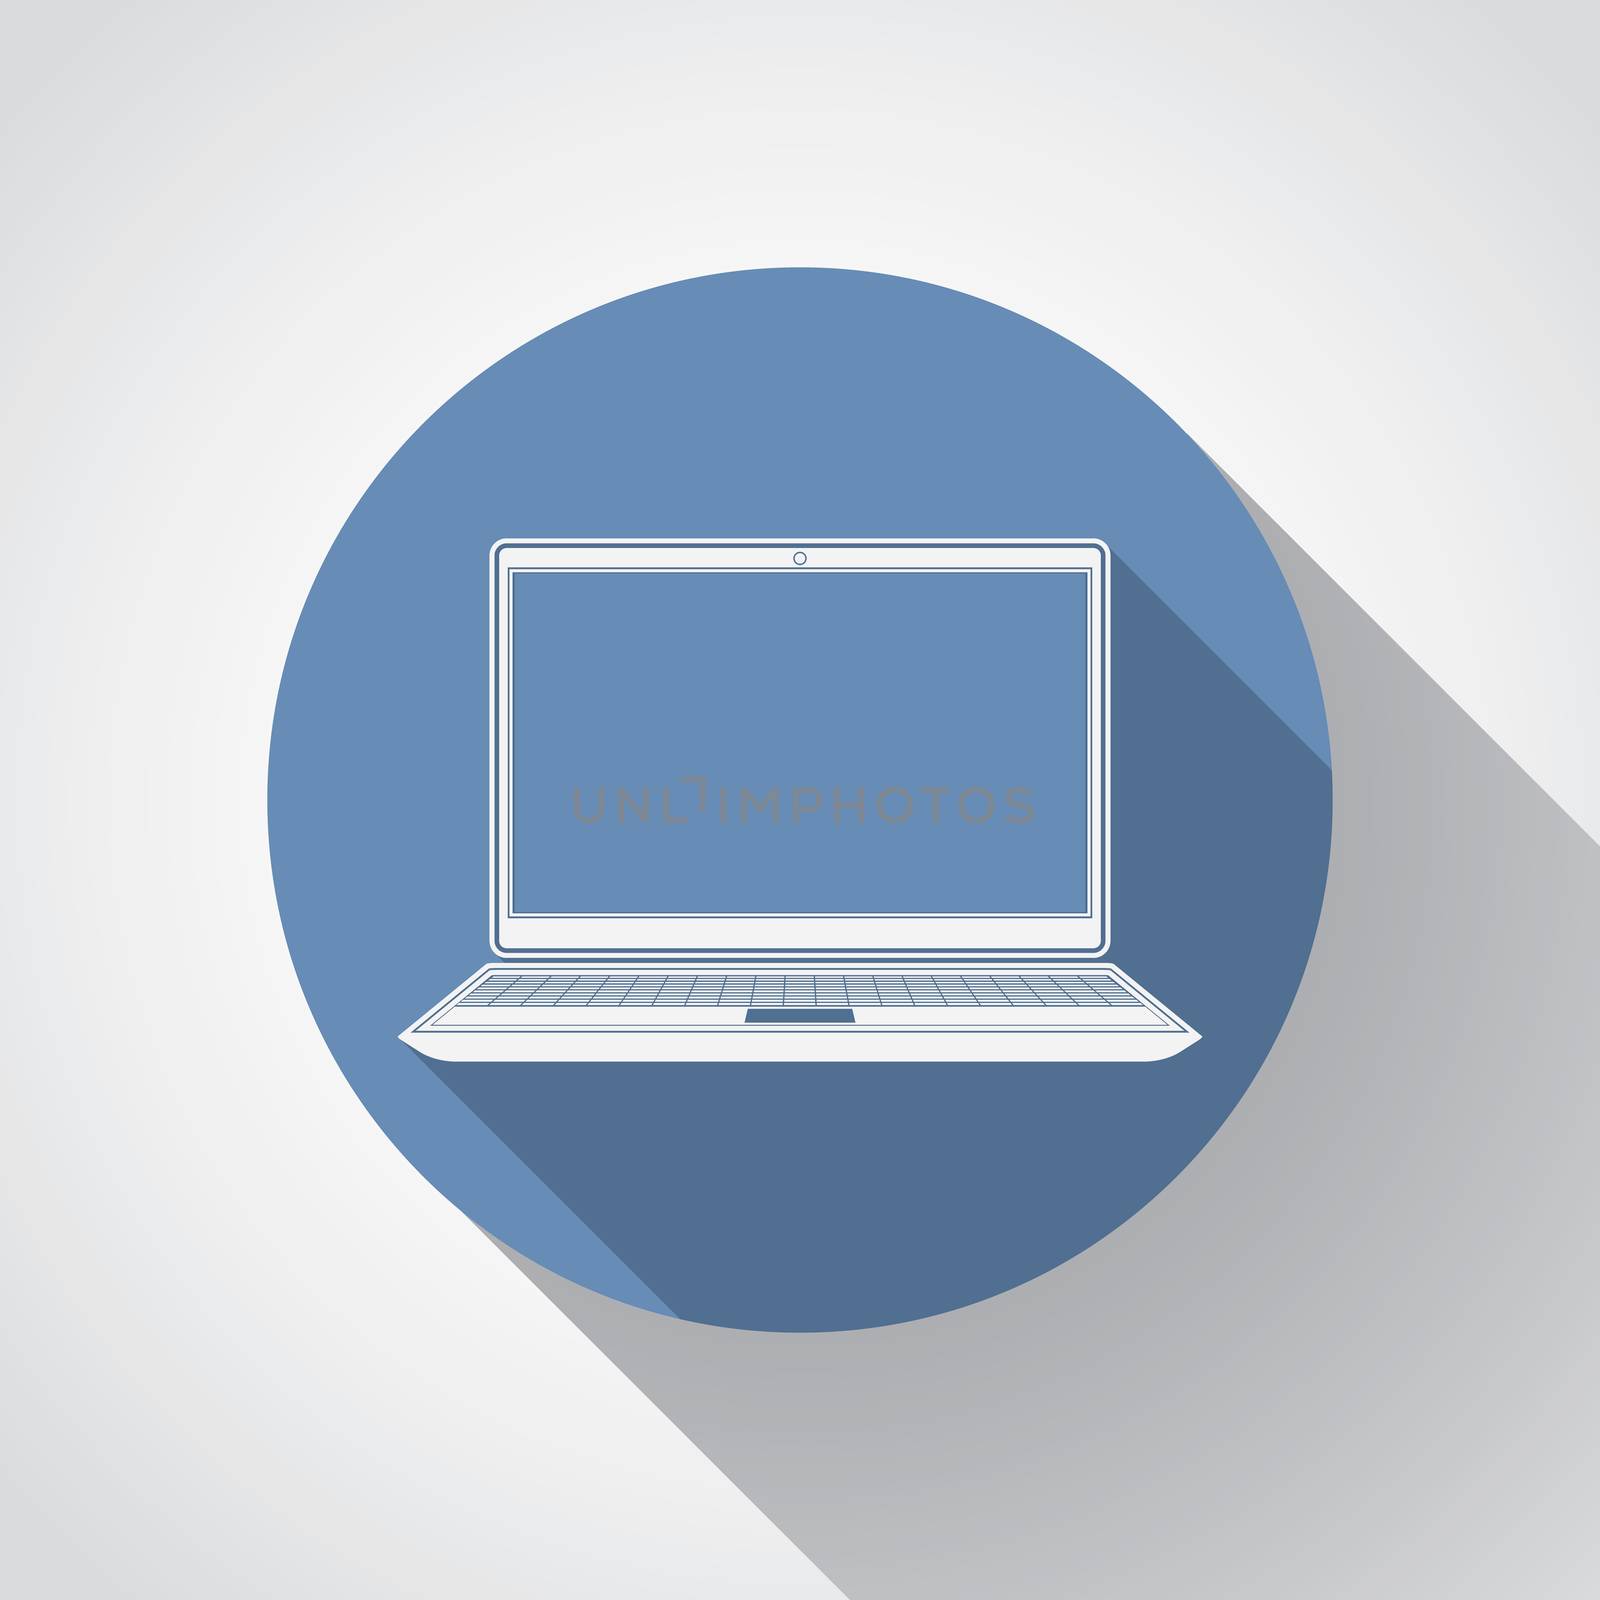 Laptop flat icon with long shadow by Lemon_workshop